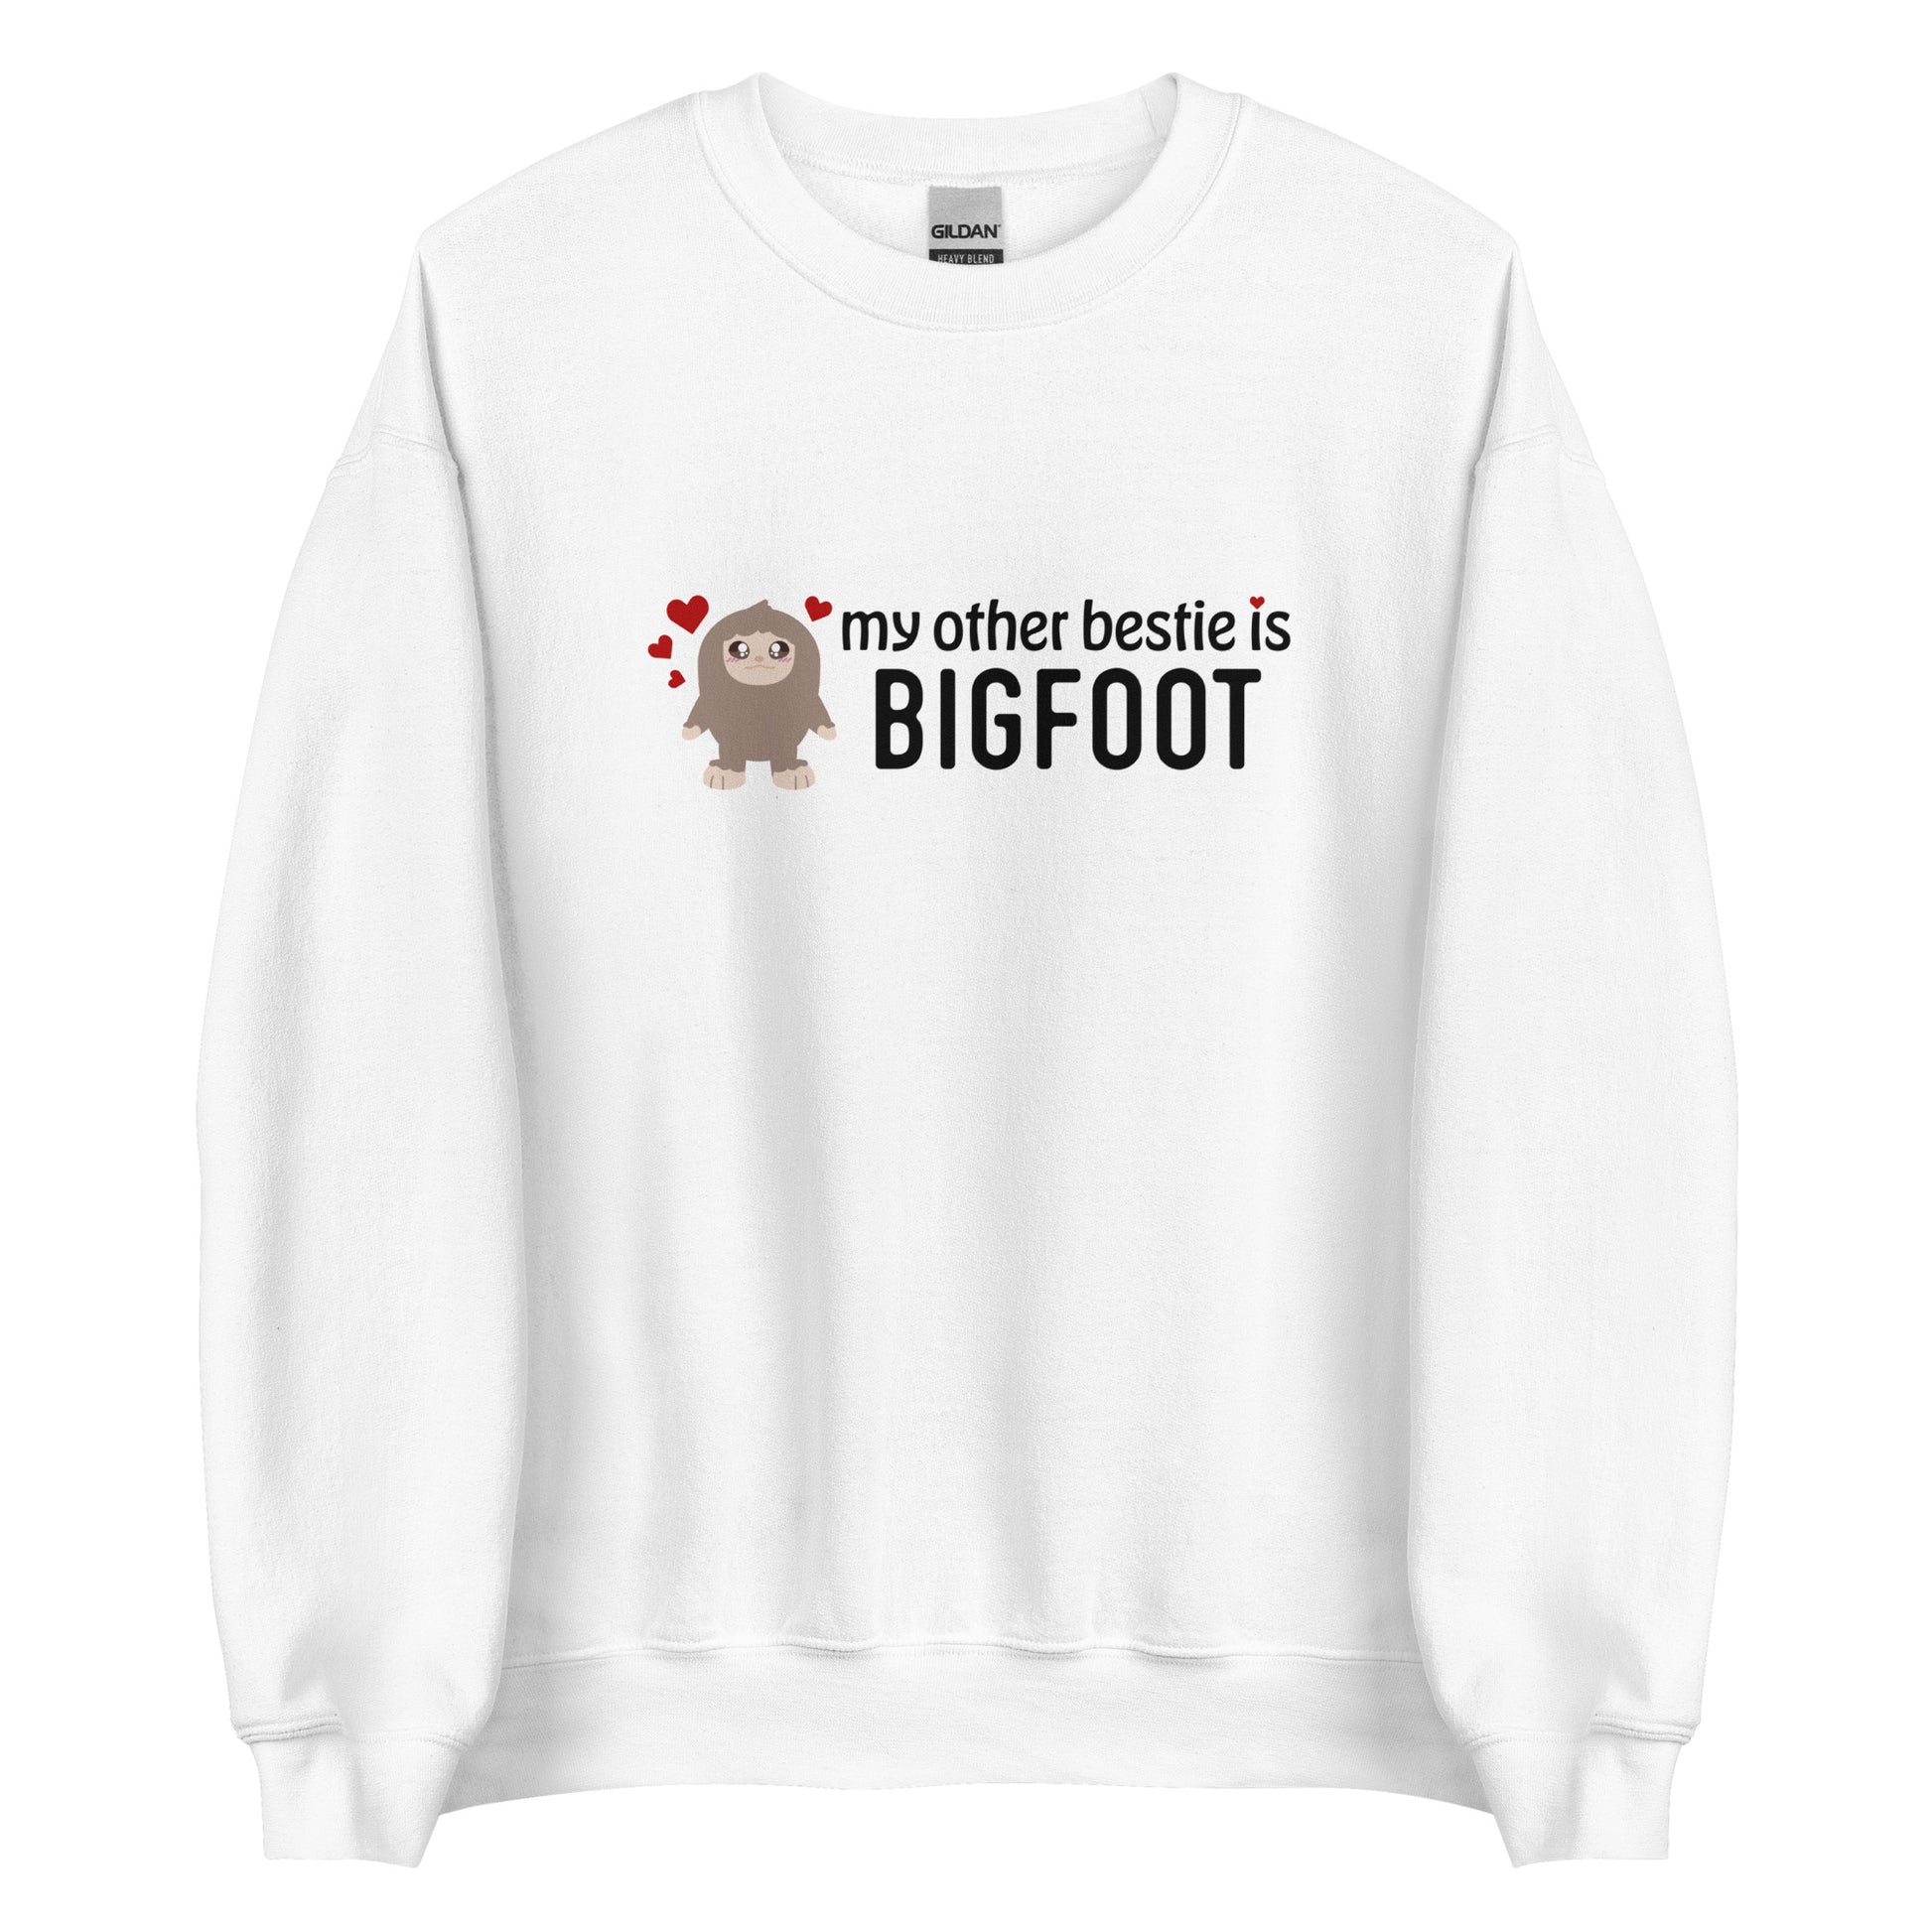 A white crewneck sweatshirt featuring a cutesy illustration of Bigfoot surrounded by hearts. Text to the side of Bigfoot reads "my other bestie is Bigfoot"